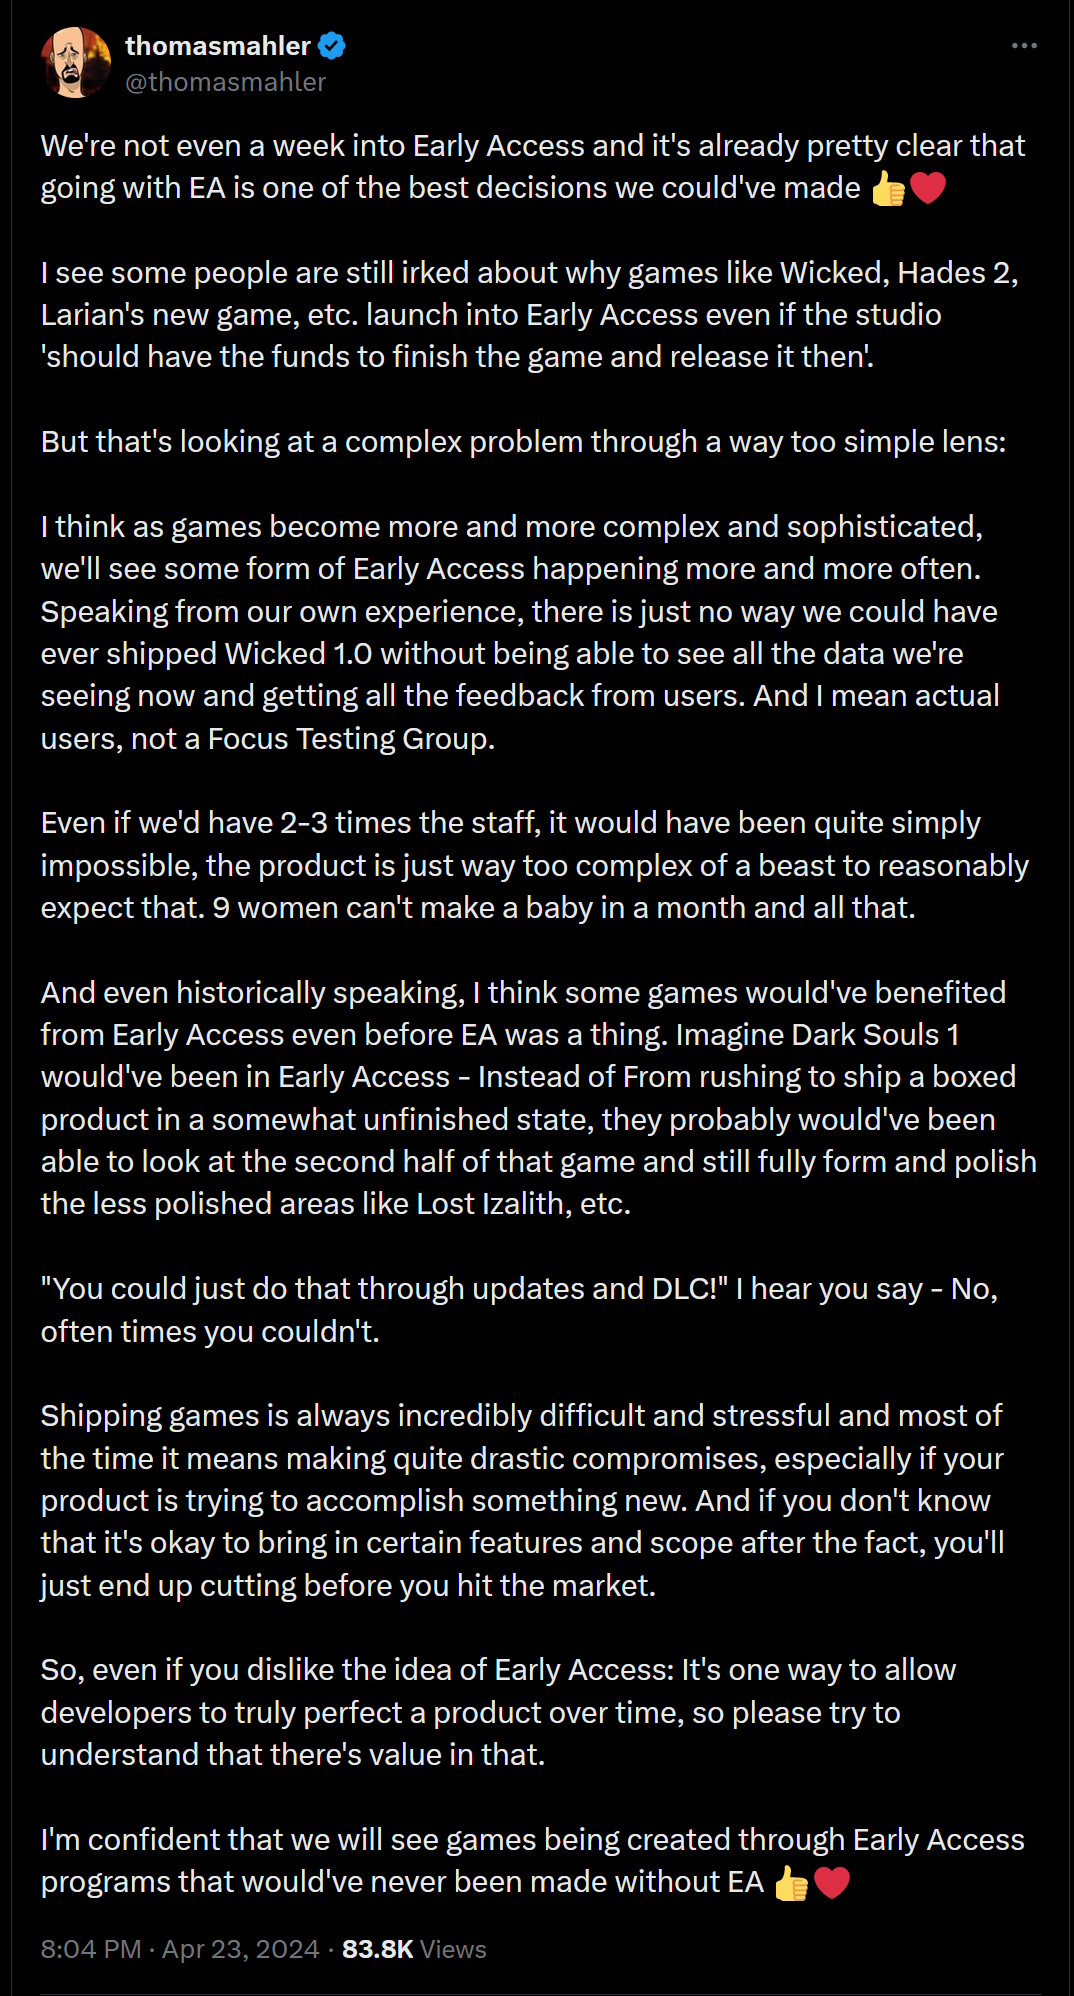 We're not even a week into Early Access and it's already pretty clear that going with EA is one of the best decisions we could've made ???  I see some people are still irked about why games like Wicked, Hades 2, Larian's new game, etc. launch into Early Access even if the studio 'should have the funds to finish the game and release it then'.  But that's looking at a complex problem through a way too simple lens:  I think as games become more and more complex and sophisticated, we'll see some form of Early Access happening more and more often. Speaking from our own experience, there is just no way we could have ever shipped Wicked 1.0 without being able to see all the data we're seeing now and getting all the feedback from users. And I mean actual users, not a Focus Testing Group.  Even if we'd have 2-3 times the staff, it would have been quite simply impossible, the product is just way too complex of a beast to reasonably expect that. 9 women can't make a baby in a month and all that.  And even historically speaking, I think some games would've benefited from Early Access even before EA was a thing. Imagine Dark Souls 1 would've been in Early Access - Instead of From rushing to ship a boxed product in a somewhat unfinished state, they probably would've been able to look at the second half of that game and still fully form and polish the less polished areas like Lost Izalith, etc.  